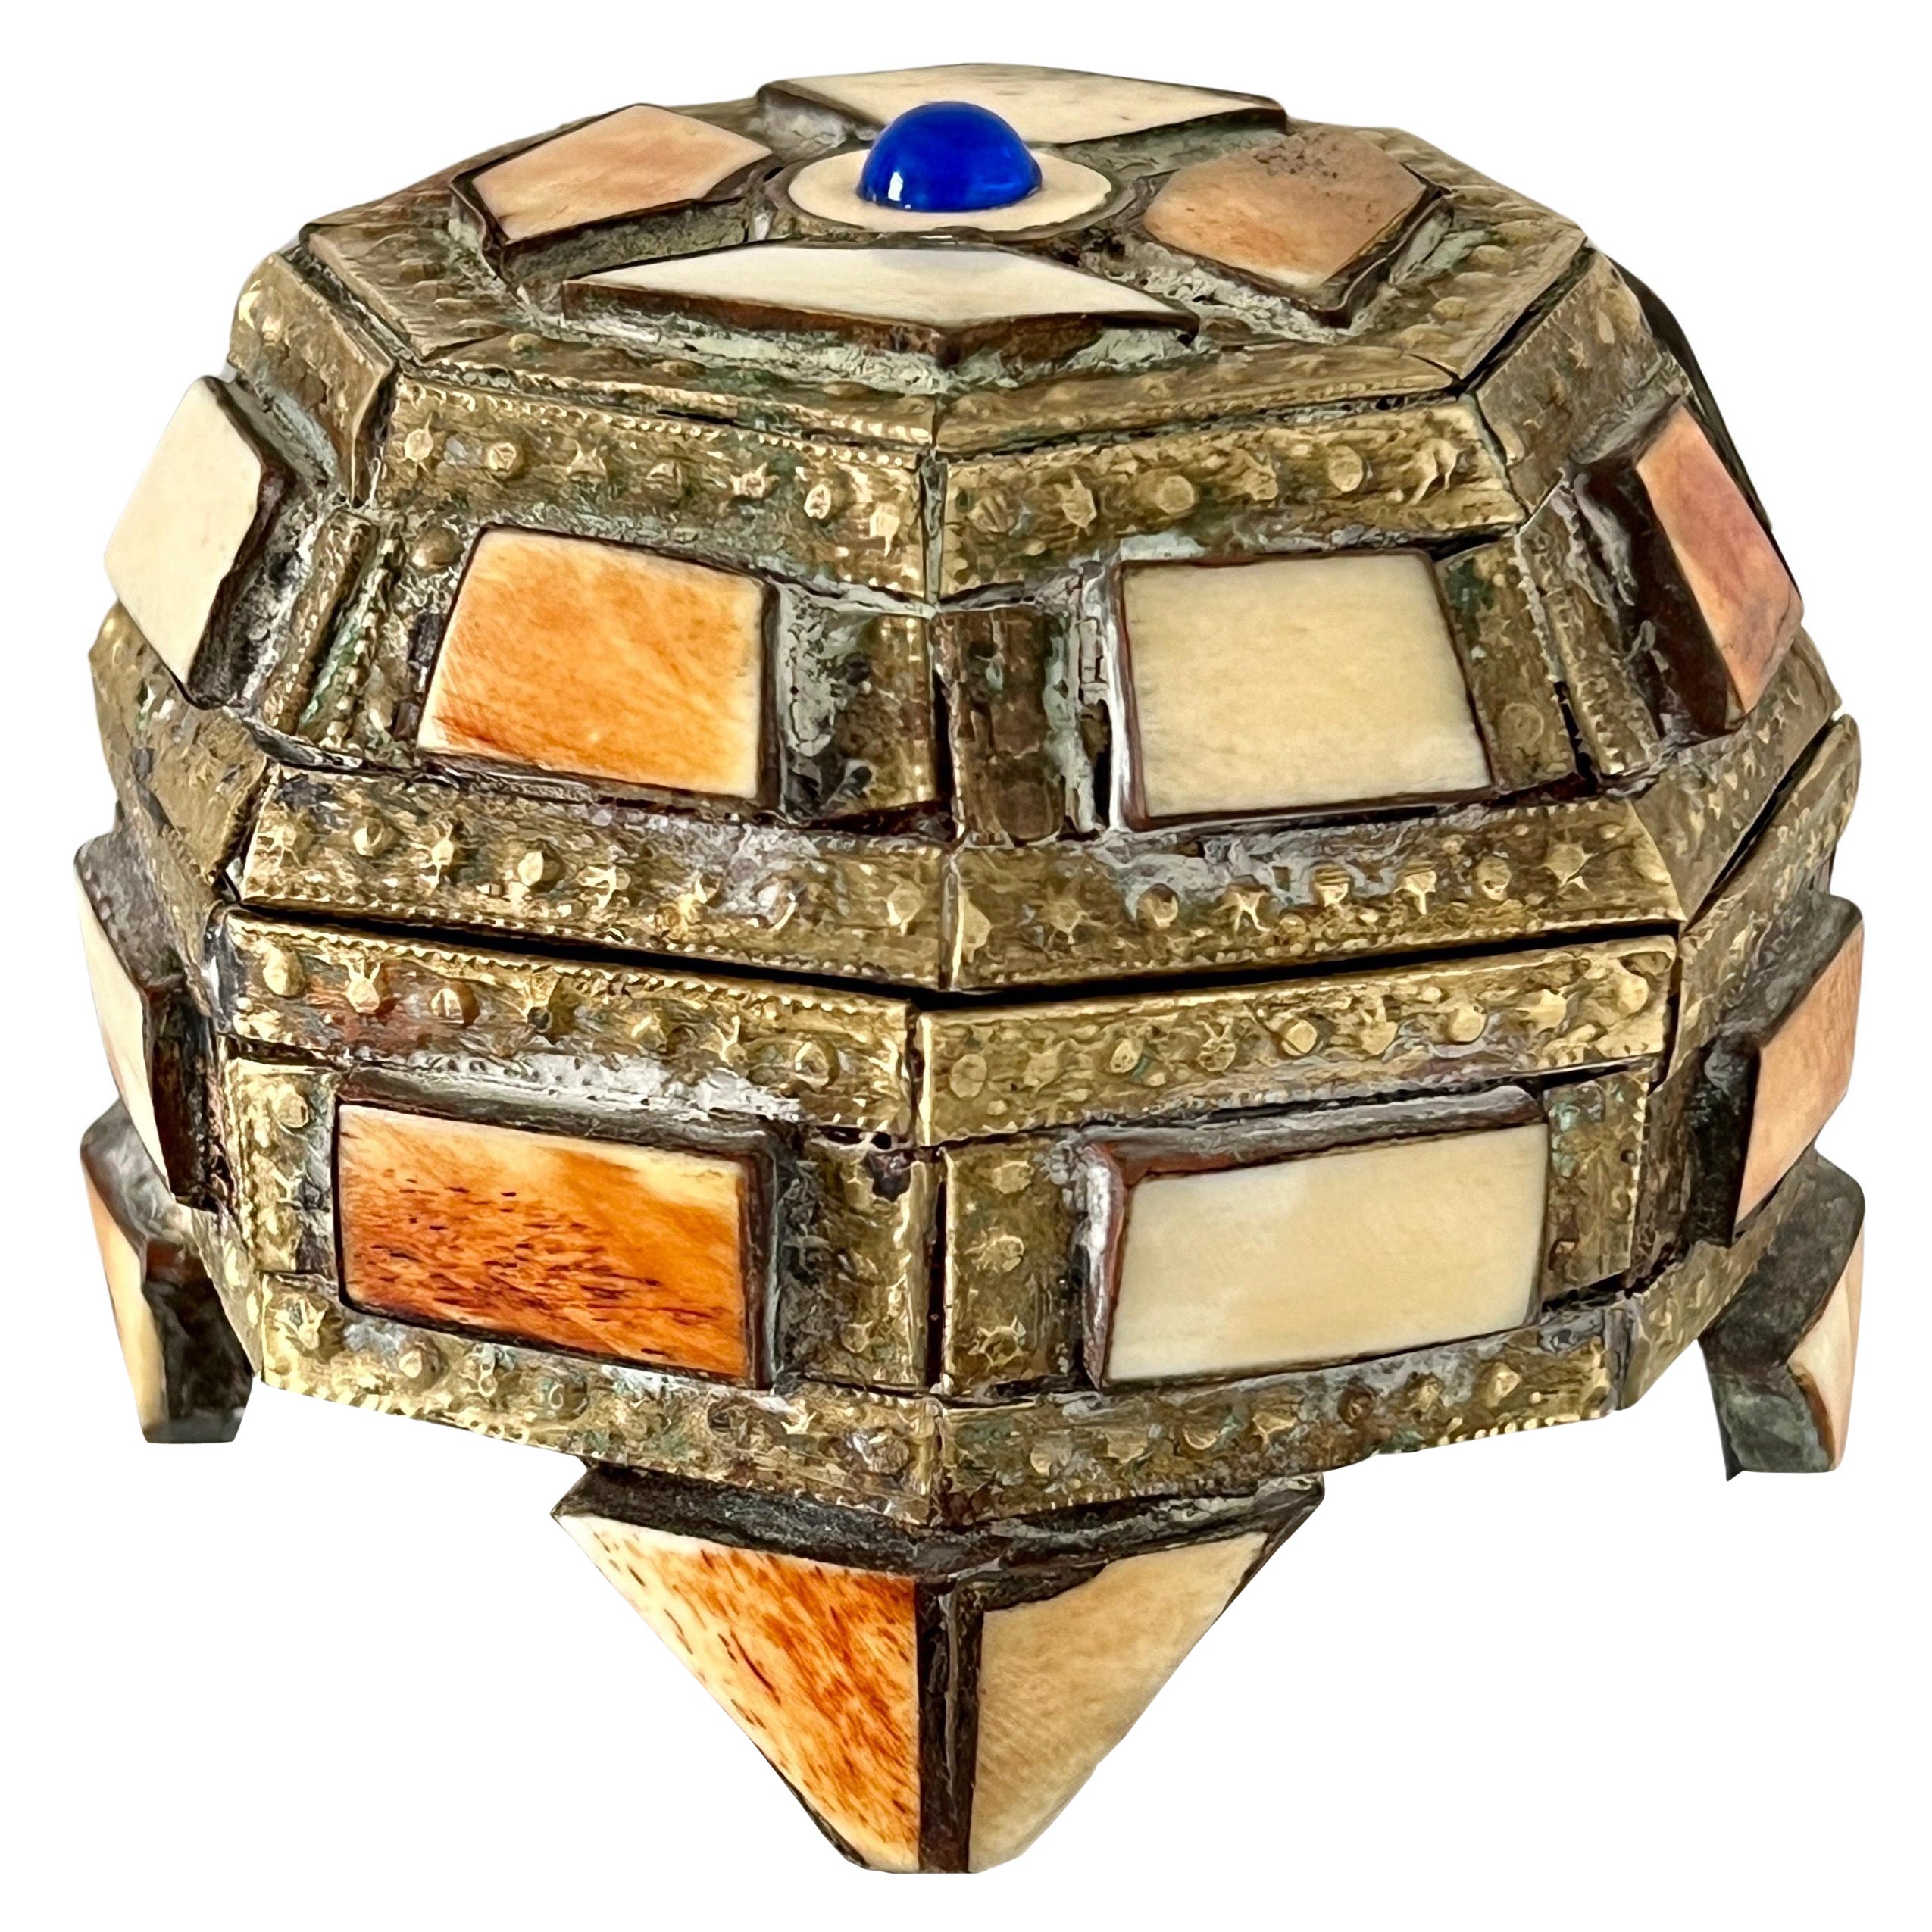 Geometric Trinket Box in Brass with Bone Inlay, Handcrafted in Morocco, 1970's For Sale